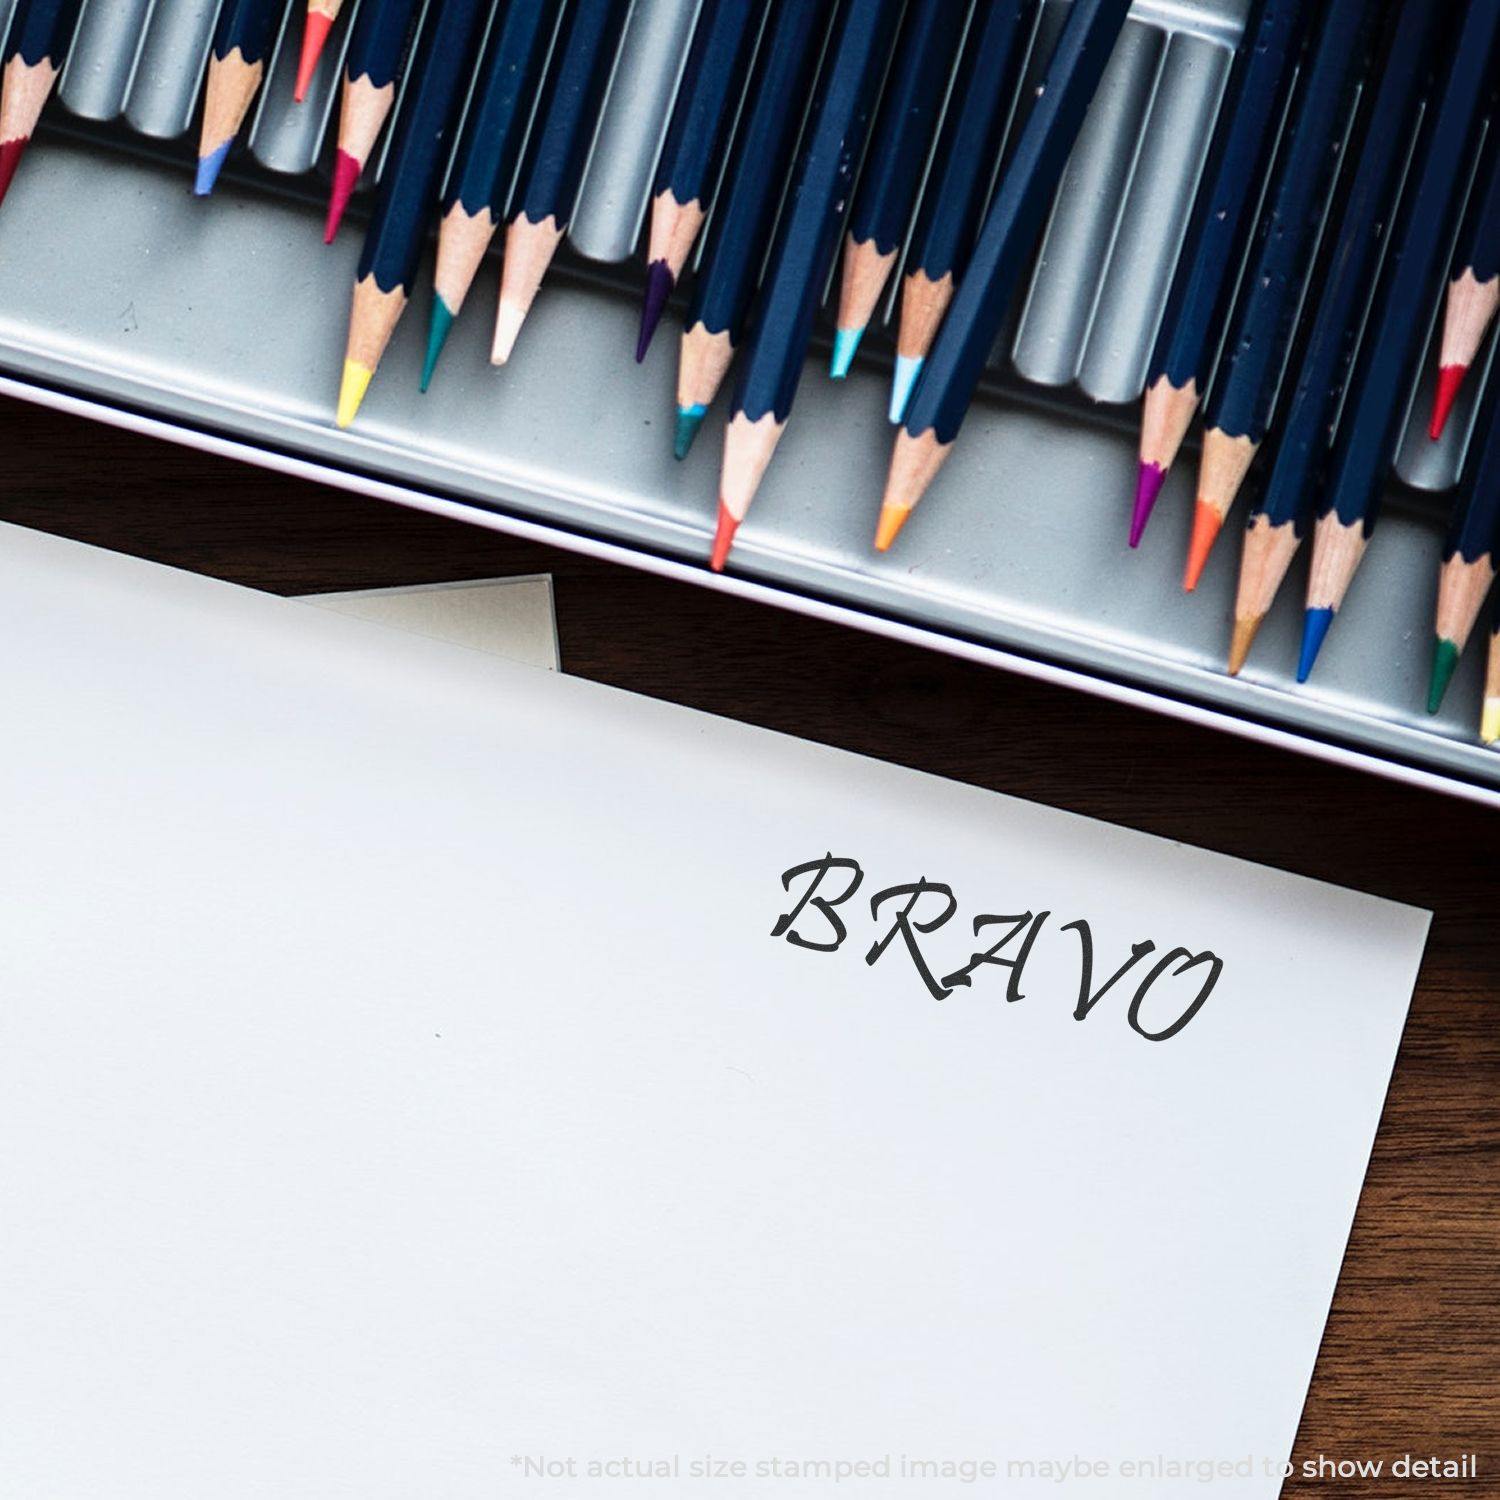 A stock office rubber stamp with a stamped image showing how the text "BRAVO" is displayed after stamping.